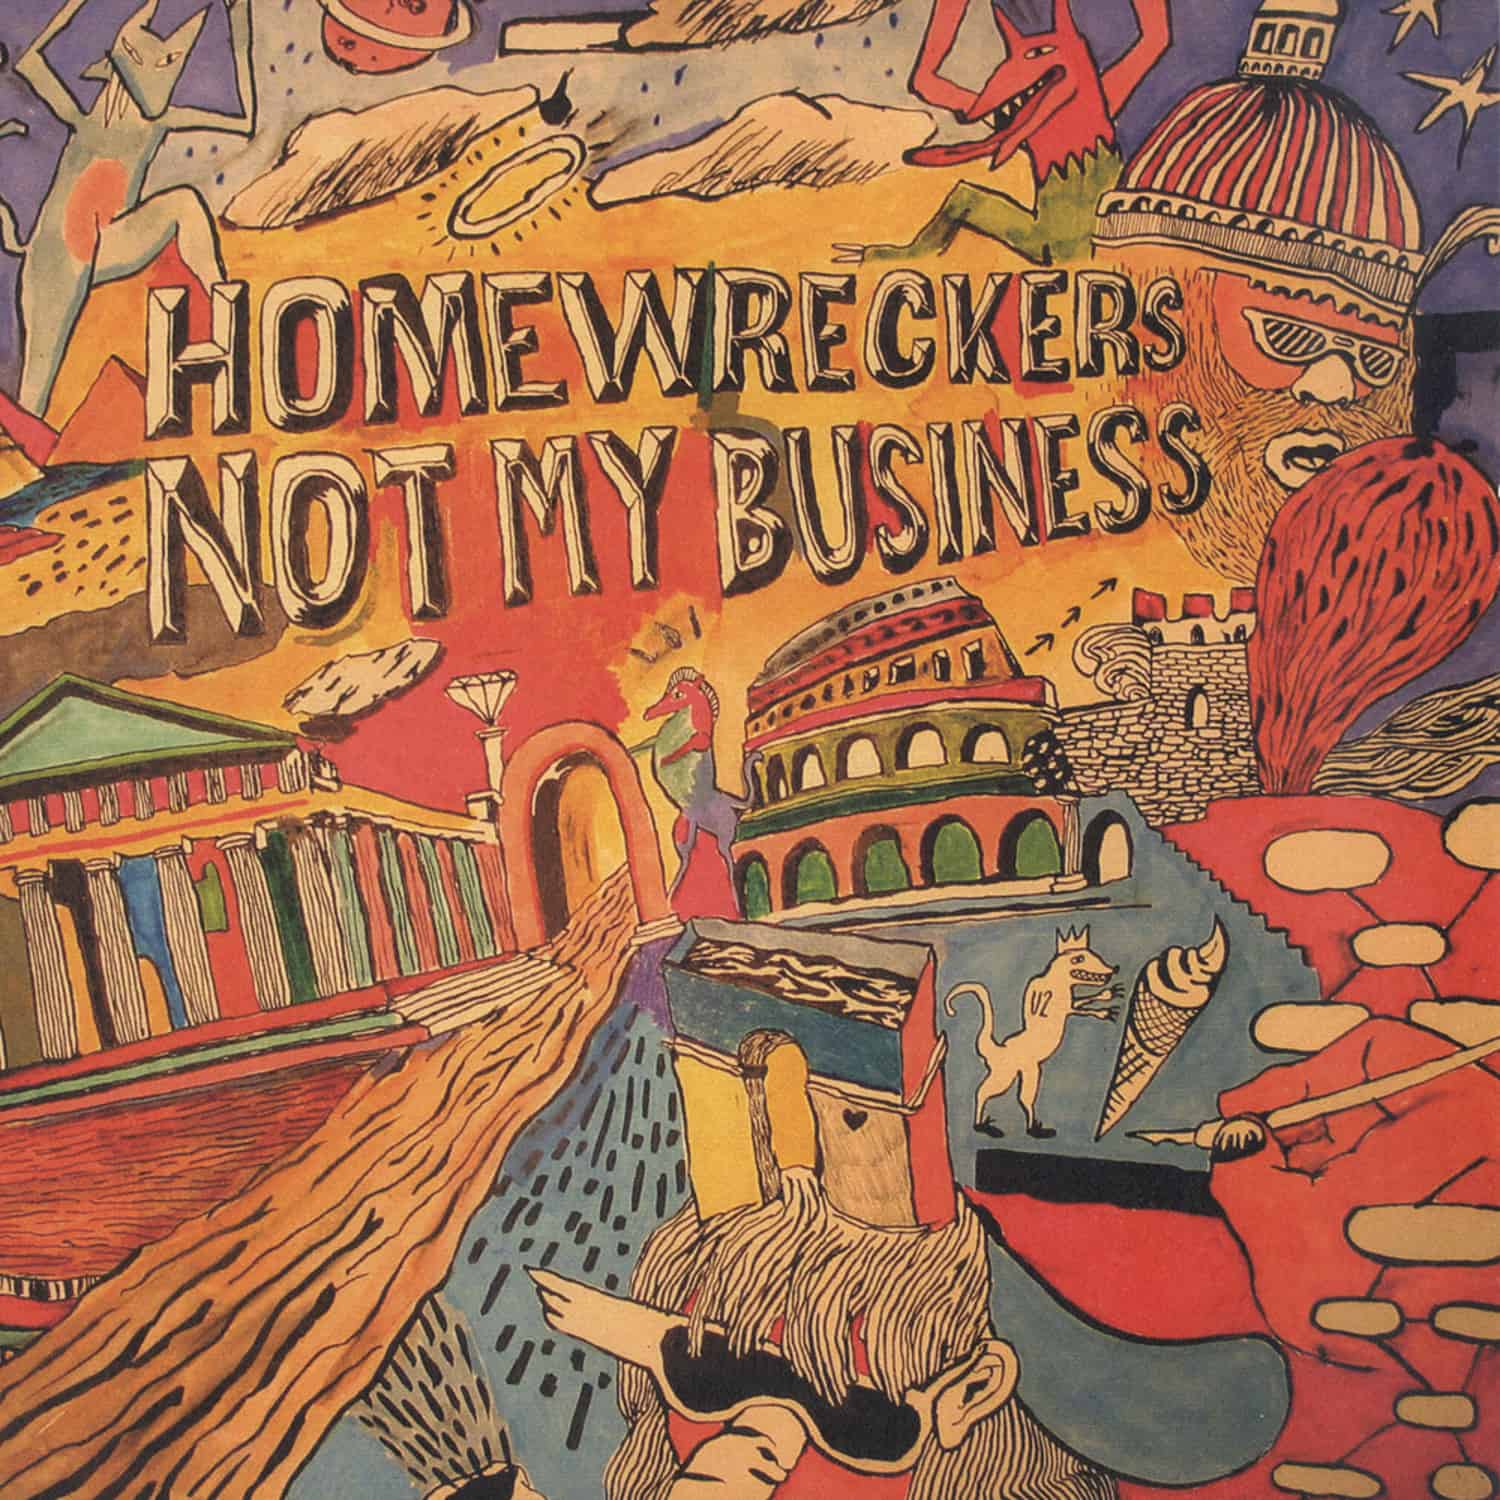 Homewreckers - NOT MY BUSINESS